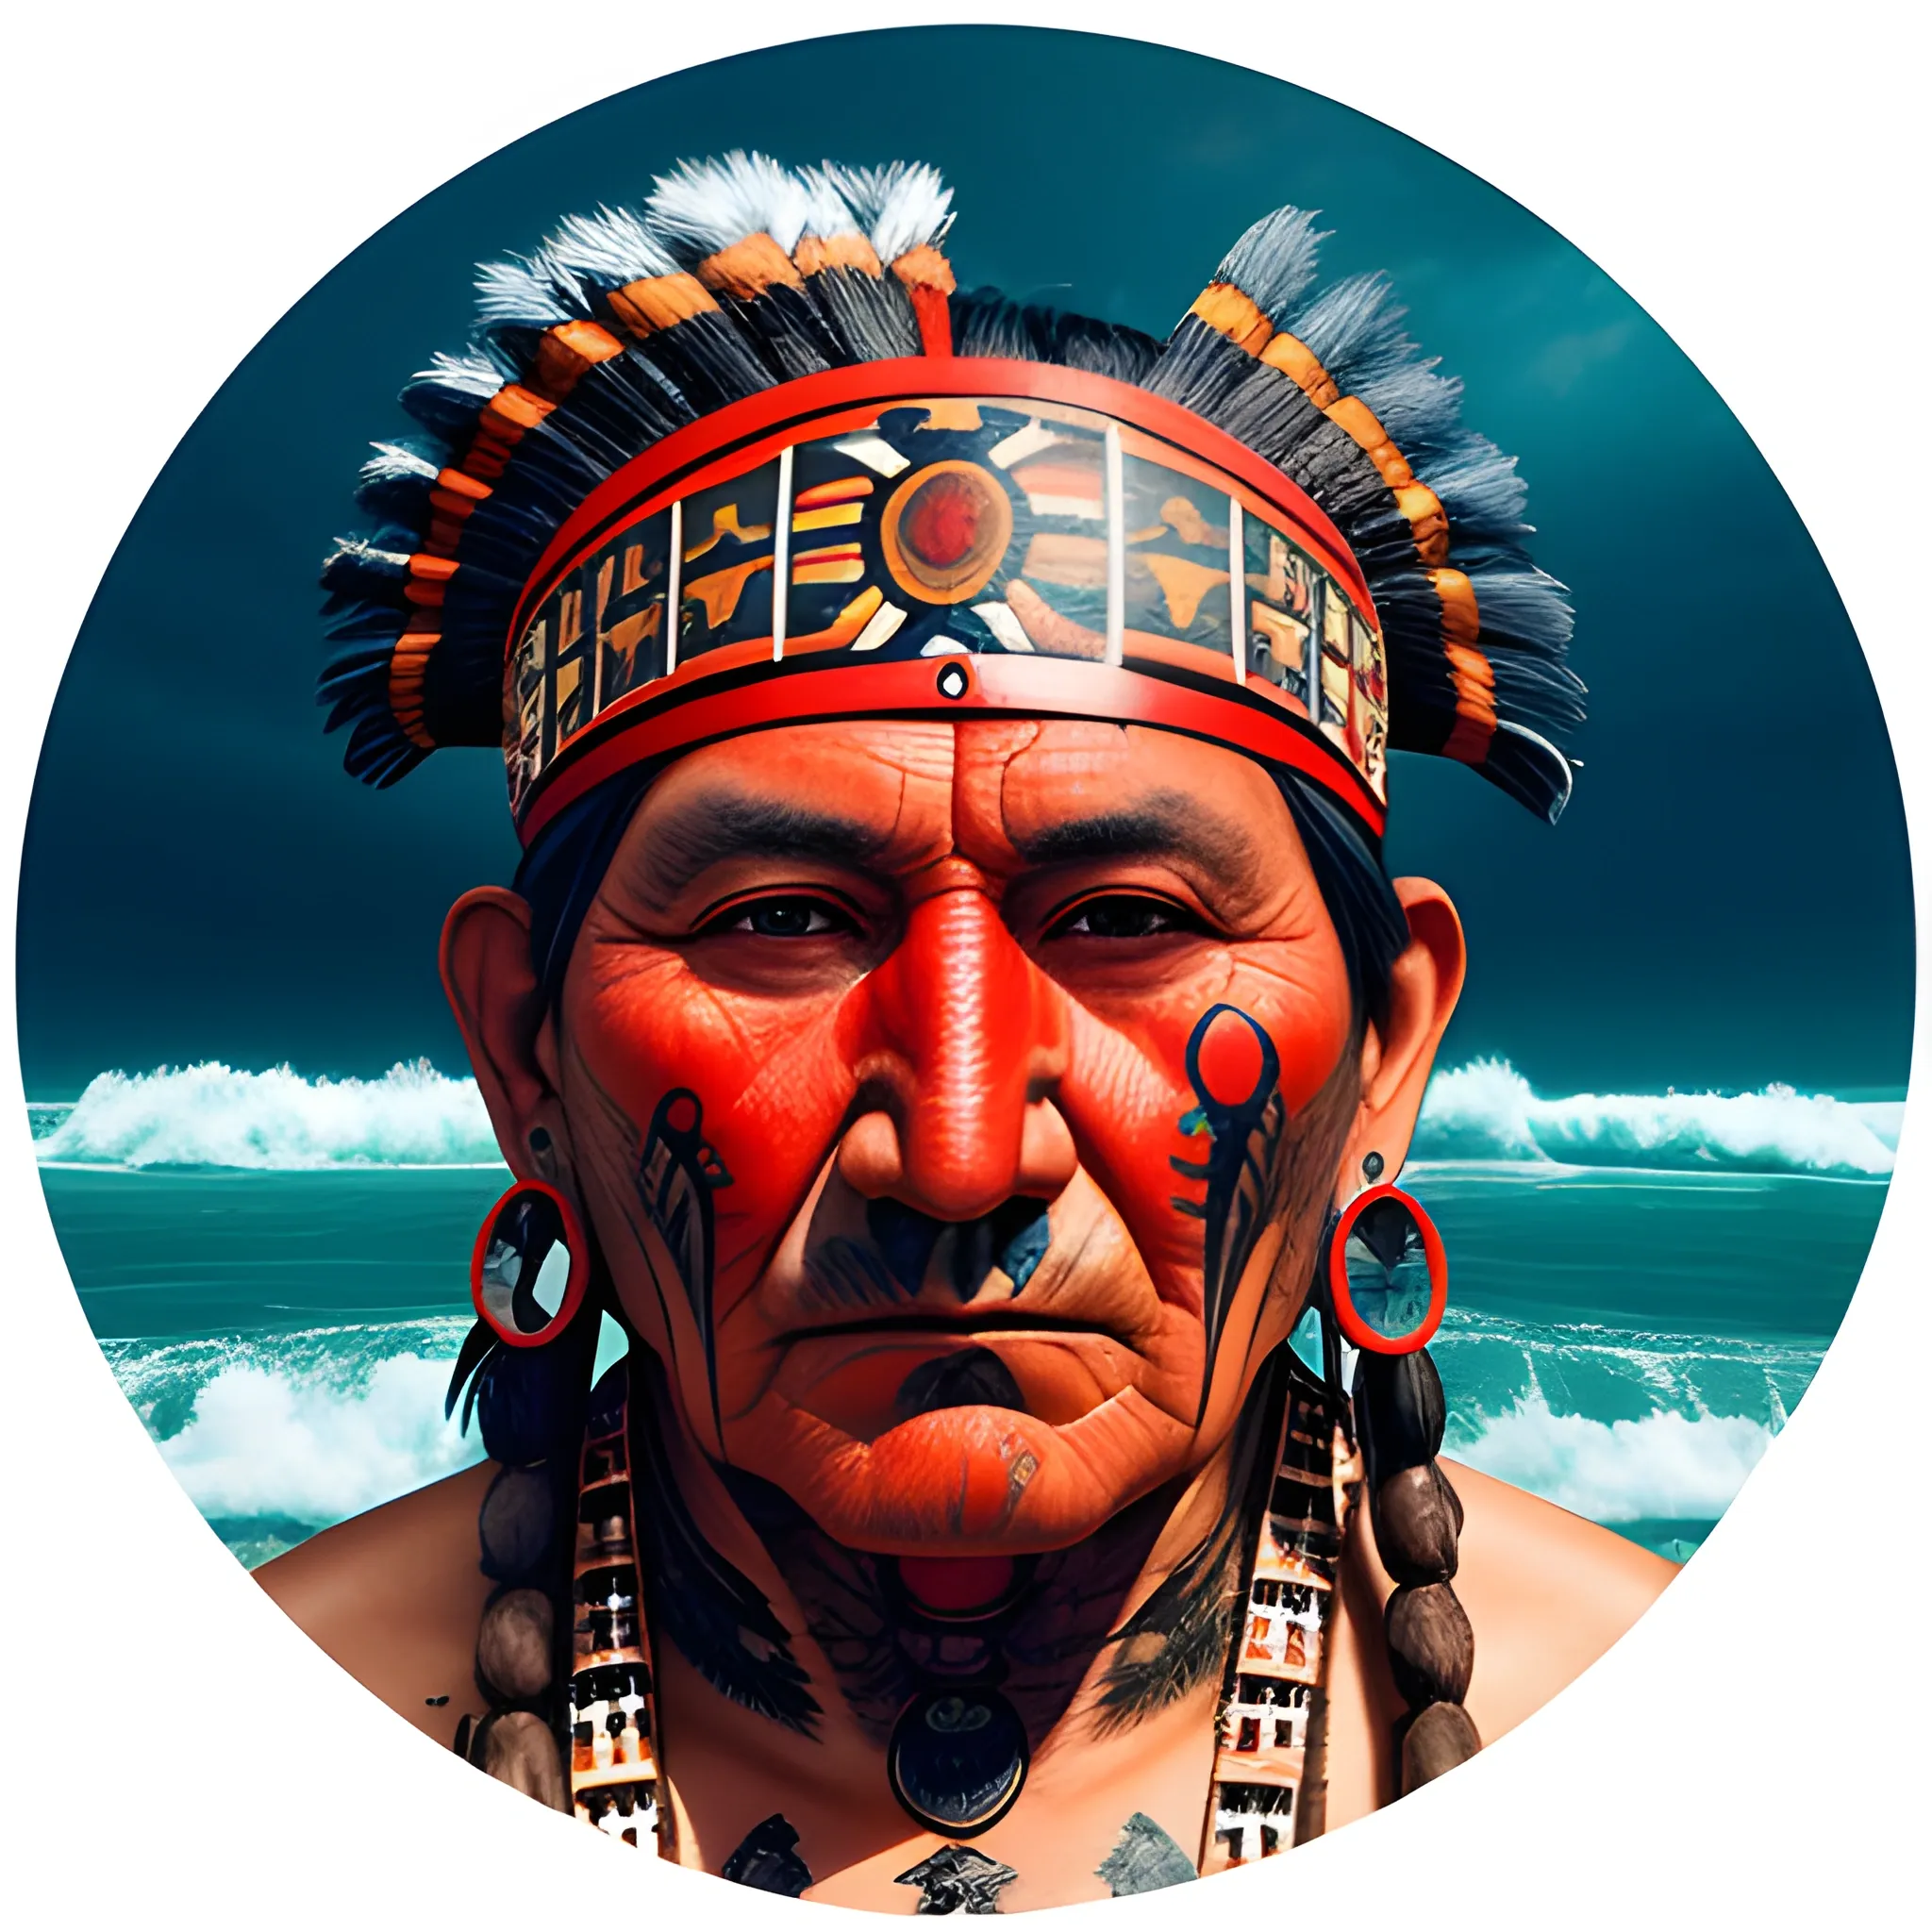 face of chief redskin man. landscape-body-tatoo, sea,
athmospher, Trippy